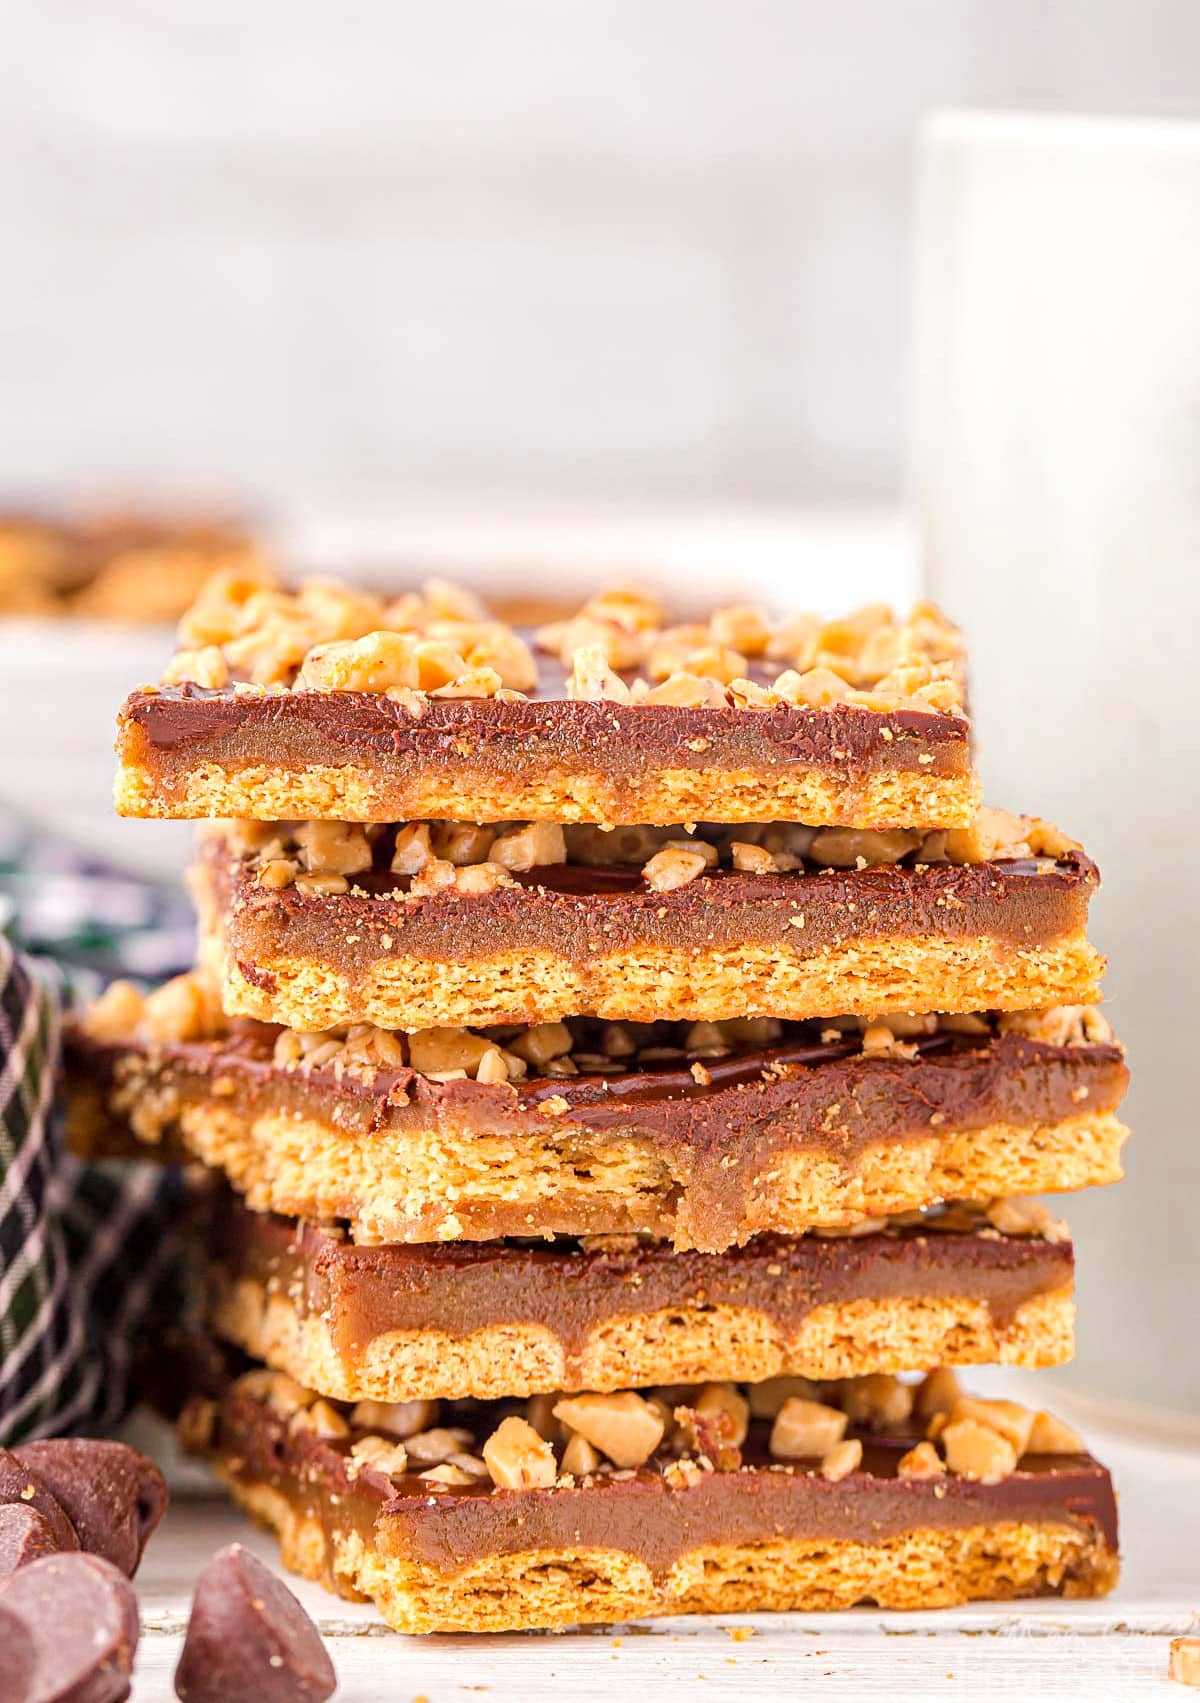 six pieces of graham cracker toffee stacked on top of each other with some chocolate chips scattered in front.